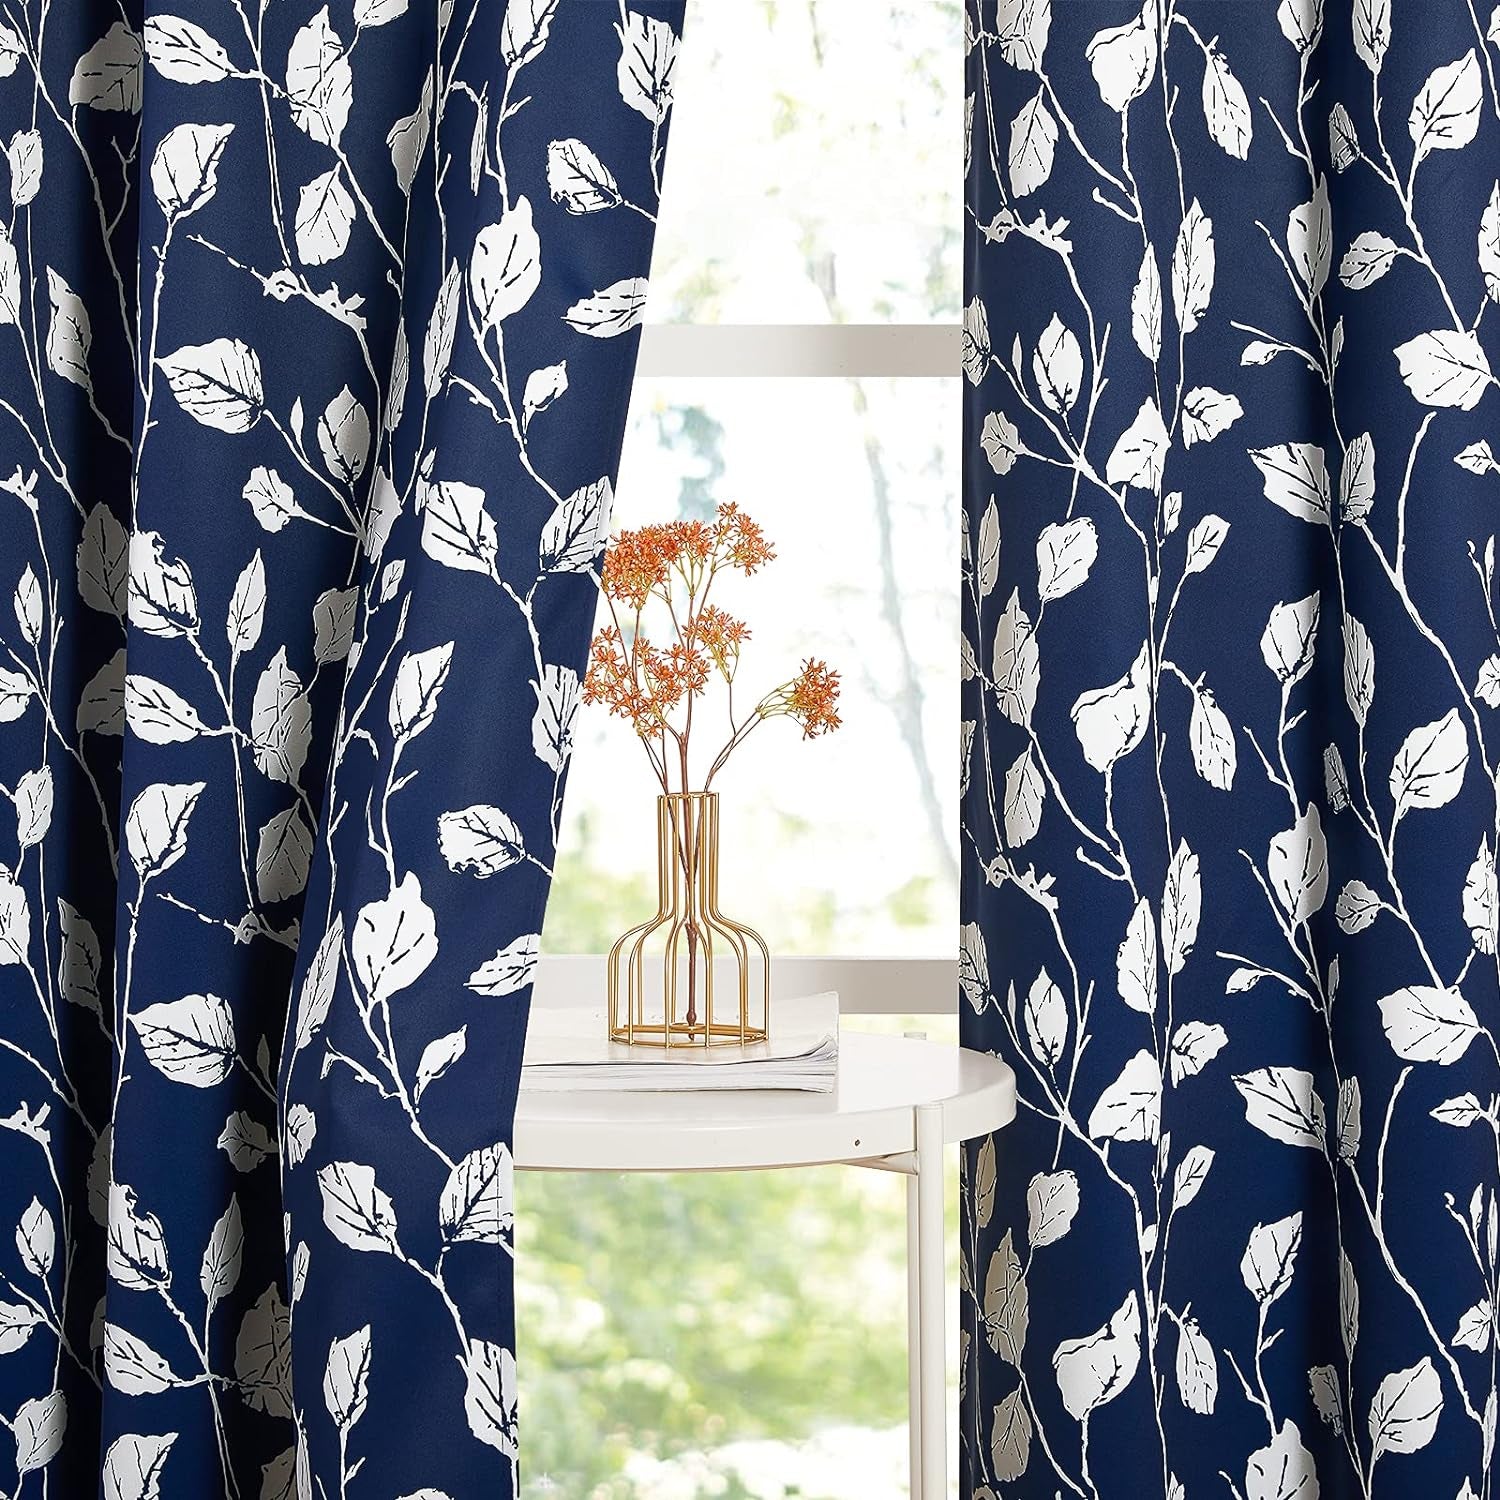 KGORGE Blackout Curtains & Drapes Boho Home/Office Artistic Decor with Vivid Watercolor Floral Painting Thermal Insulated Energy Efficient Shades for Bedroom Living Room (Blue, W 52" X L 84", 1 Pair)  KGORGE 5.Navy Blue W 52 X L 63 